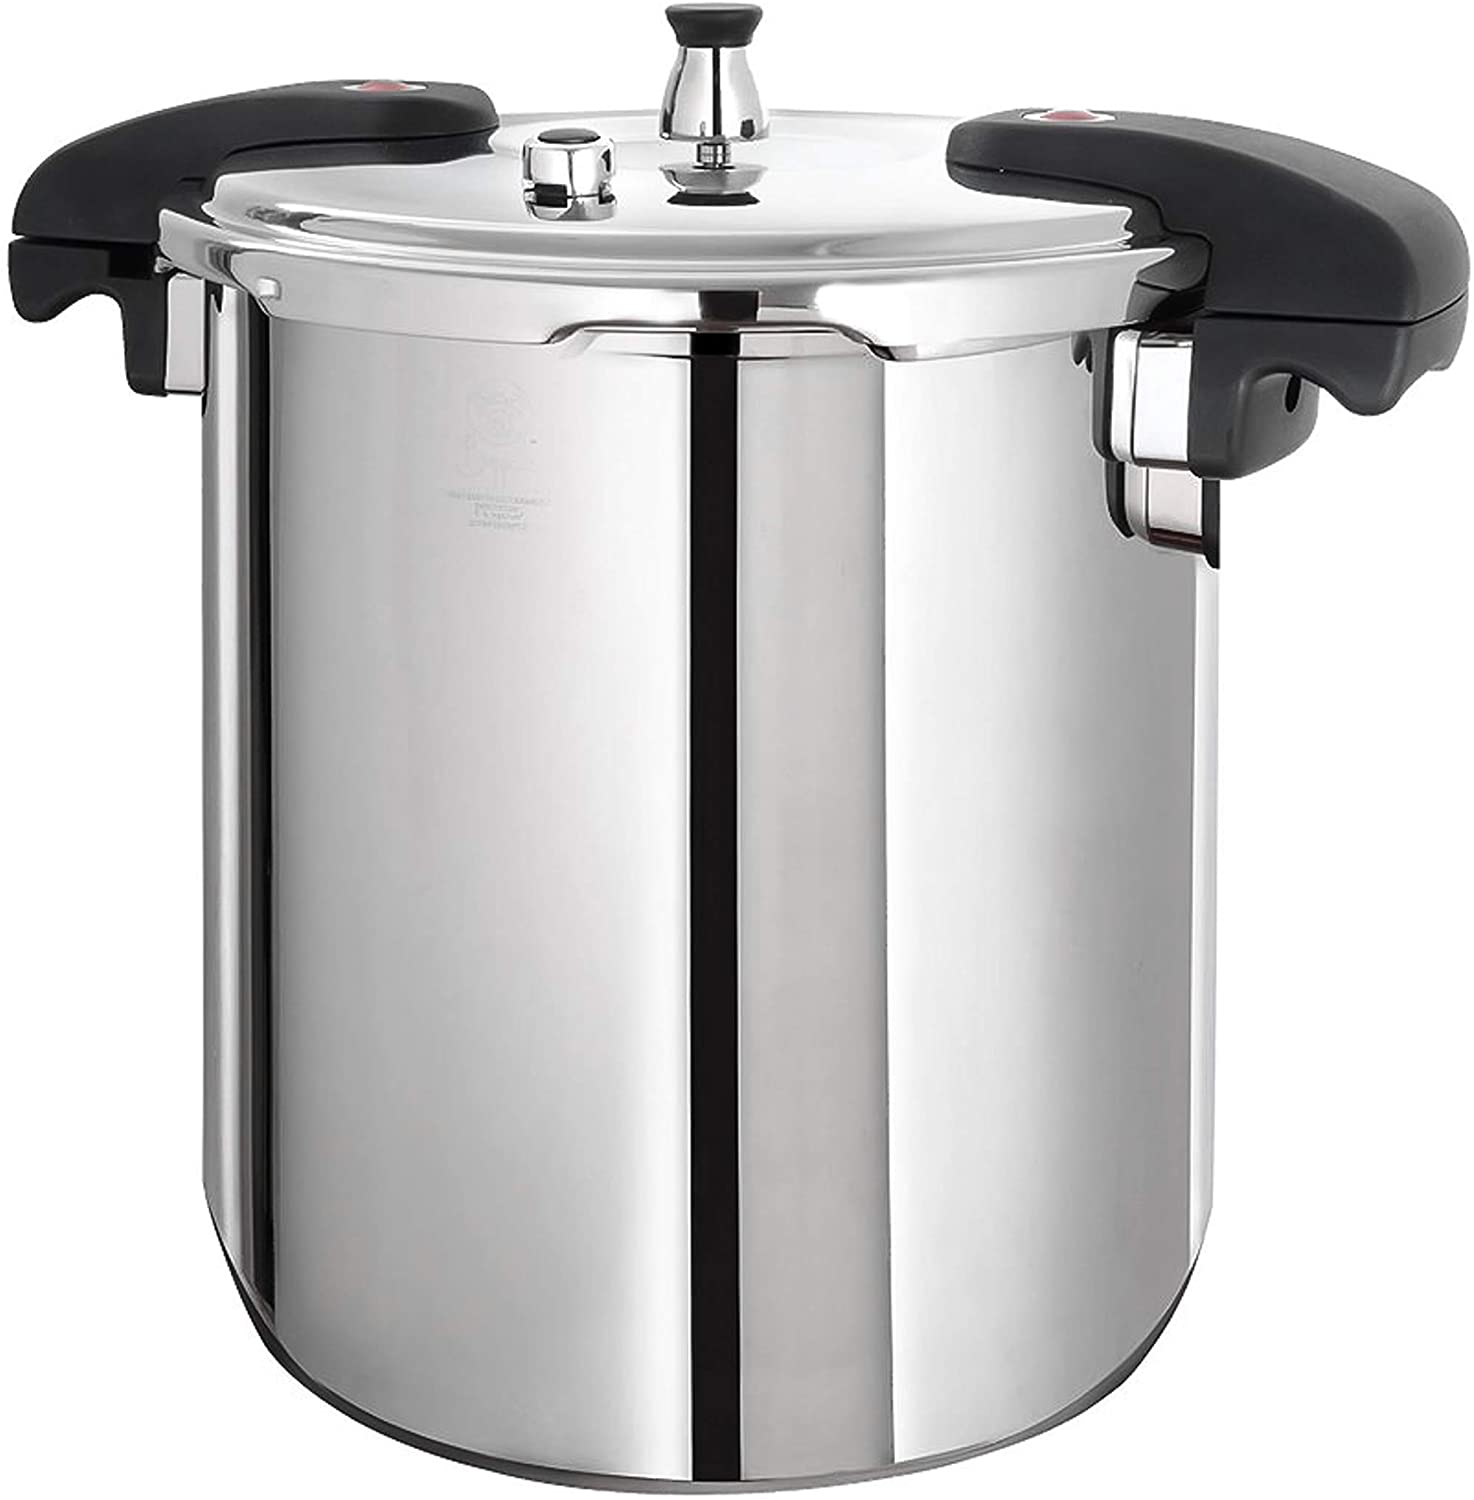 5 Best Pressure Canners -- Buffalo QCP420 21-Quart Stainless Steel Pressure Cooker